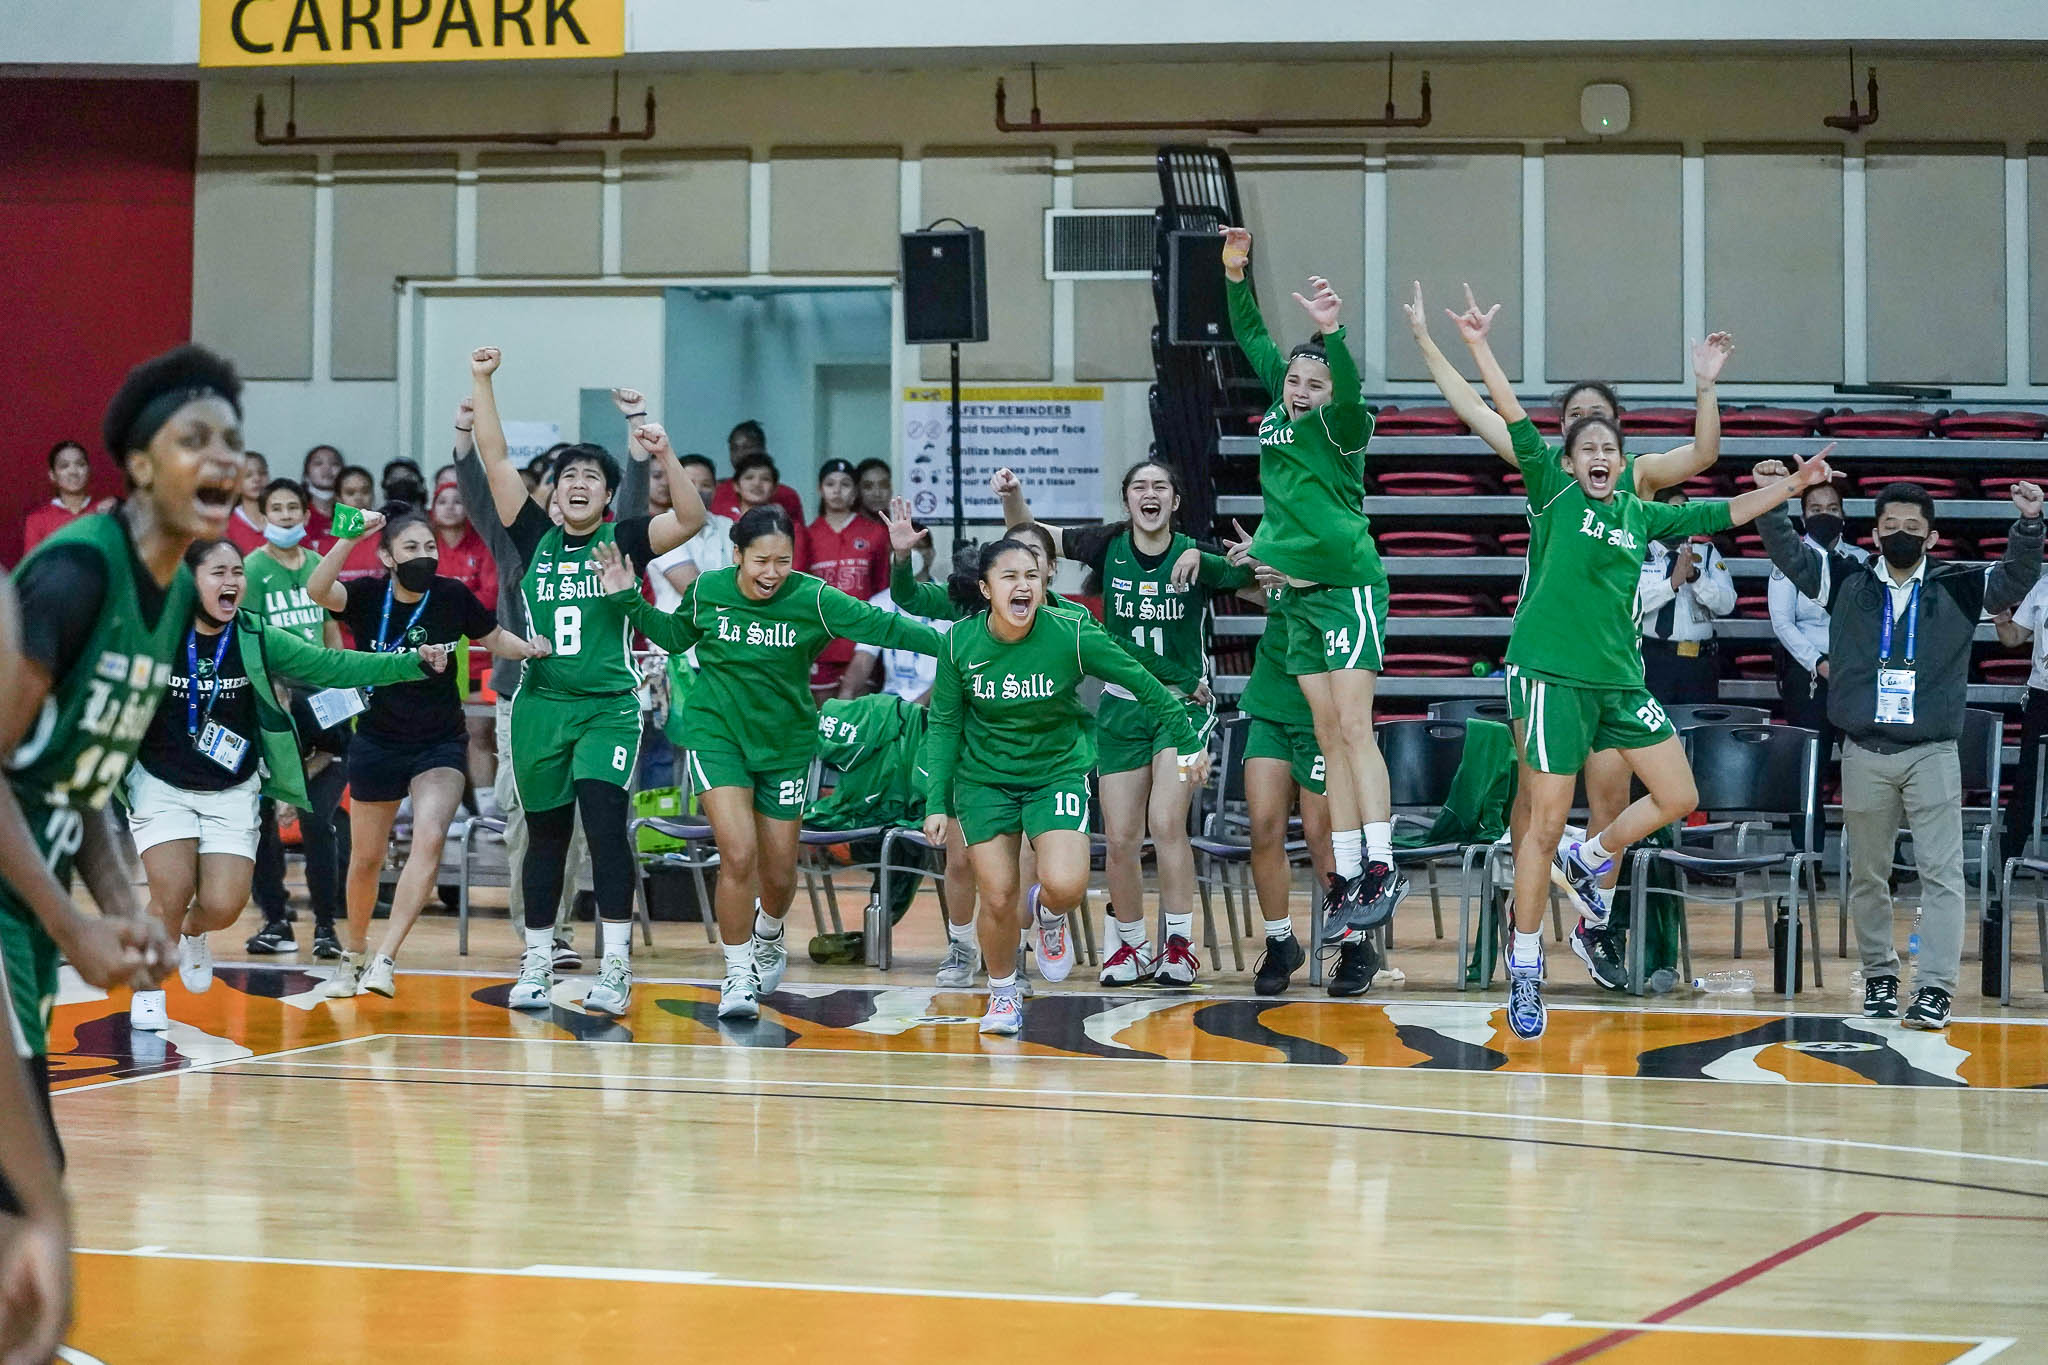 La Salle celebrates as the final whistle blows.  — IMAGE SUPPORTED BY UAAP